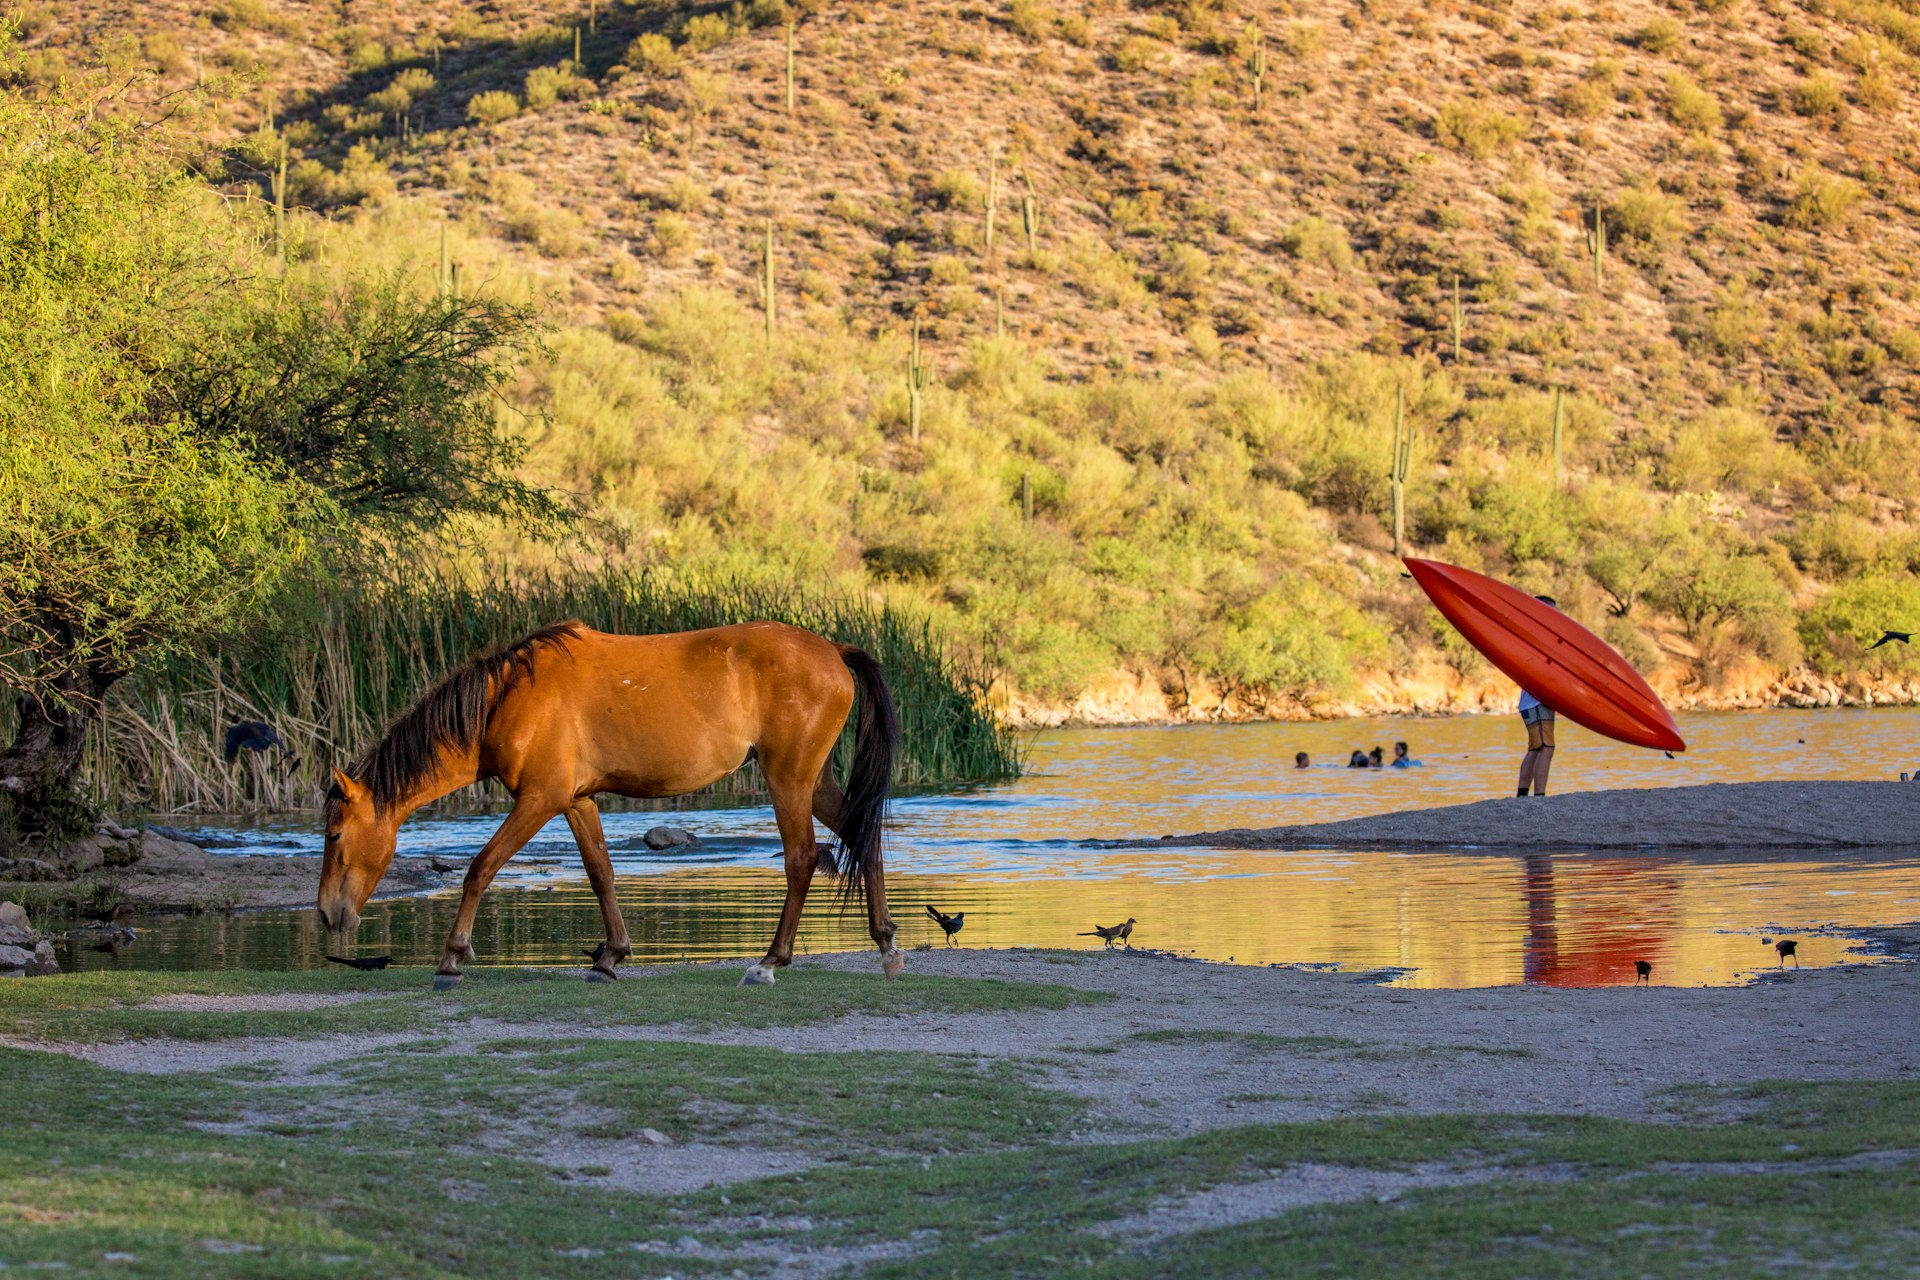 A wild horse drinks next to kayakers and swimmers in the Salt River